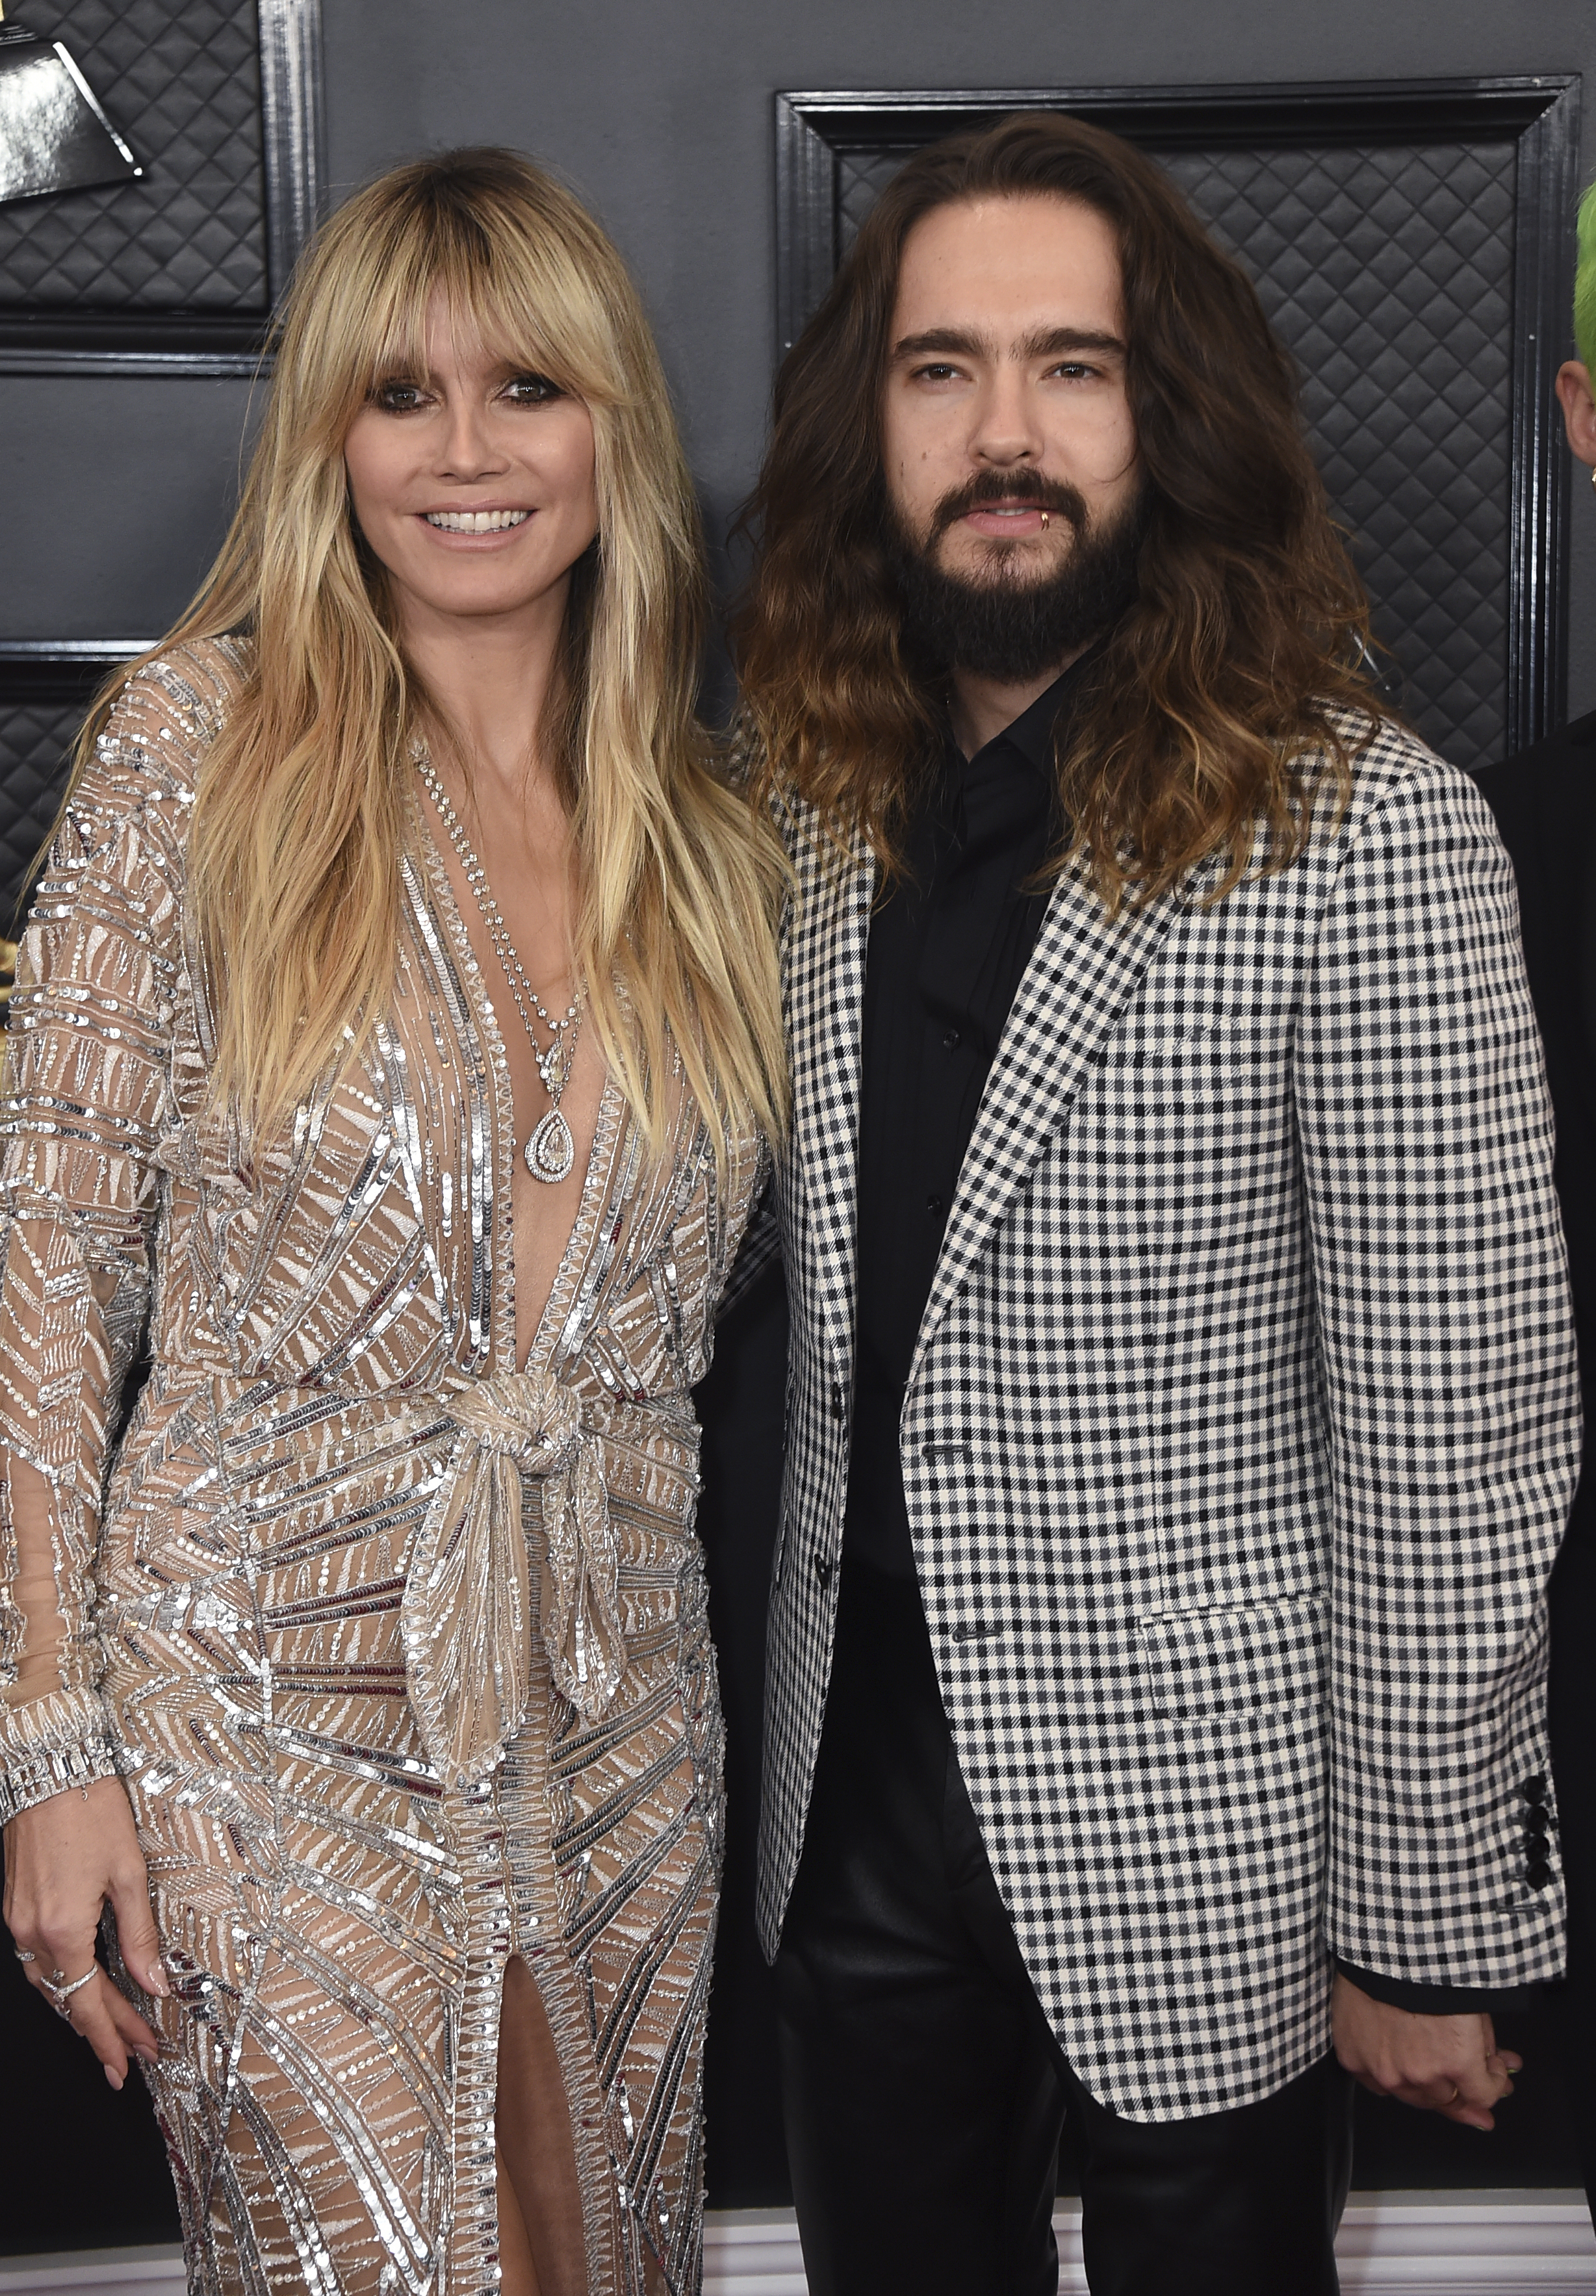  Heidi Klum and Tom Kaulitz arrive at the Grammy Awards at the Staples Center earlier this year